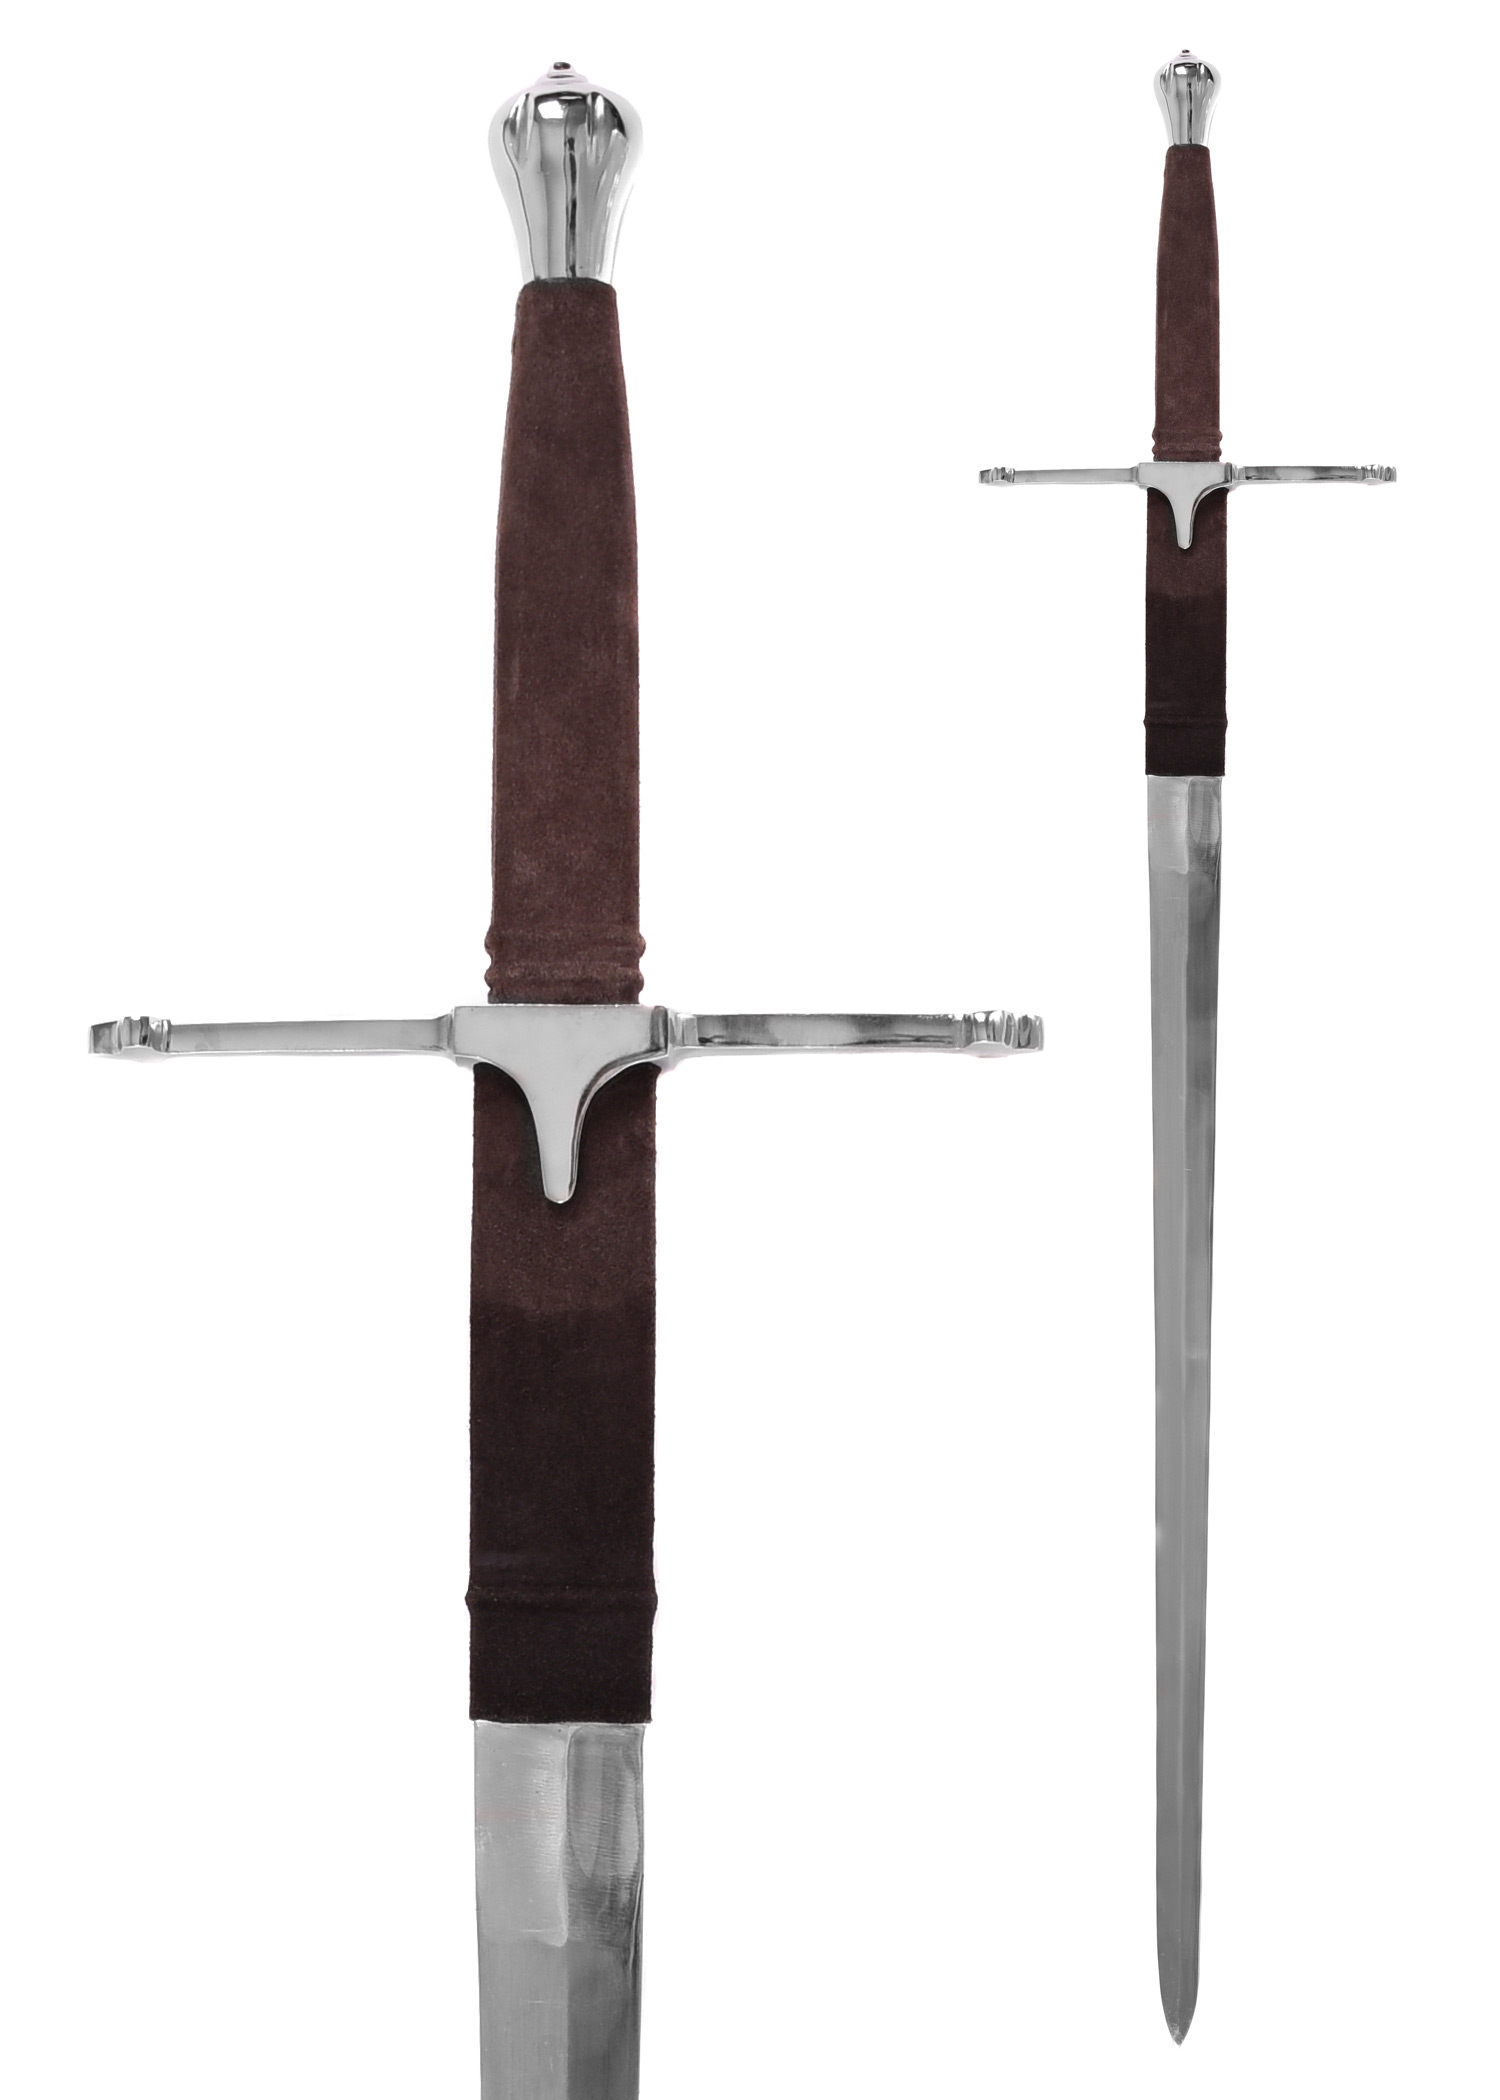 SIR WILLIAM WALLACE SWORD, Medieval Swords for sale - Avalon